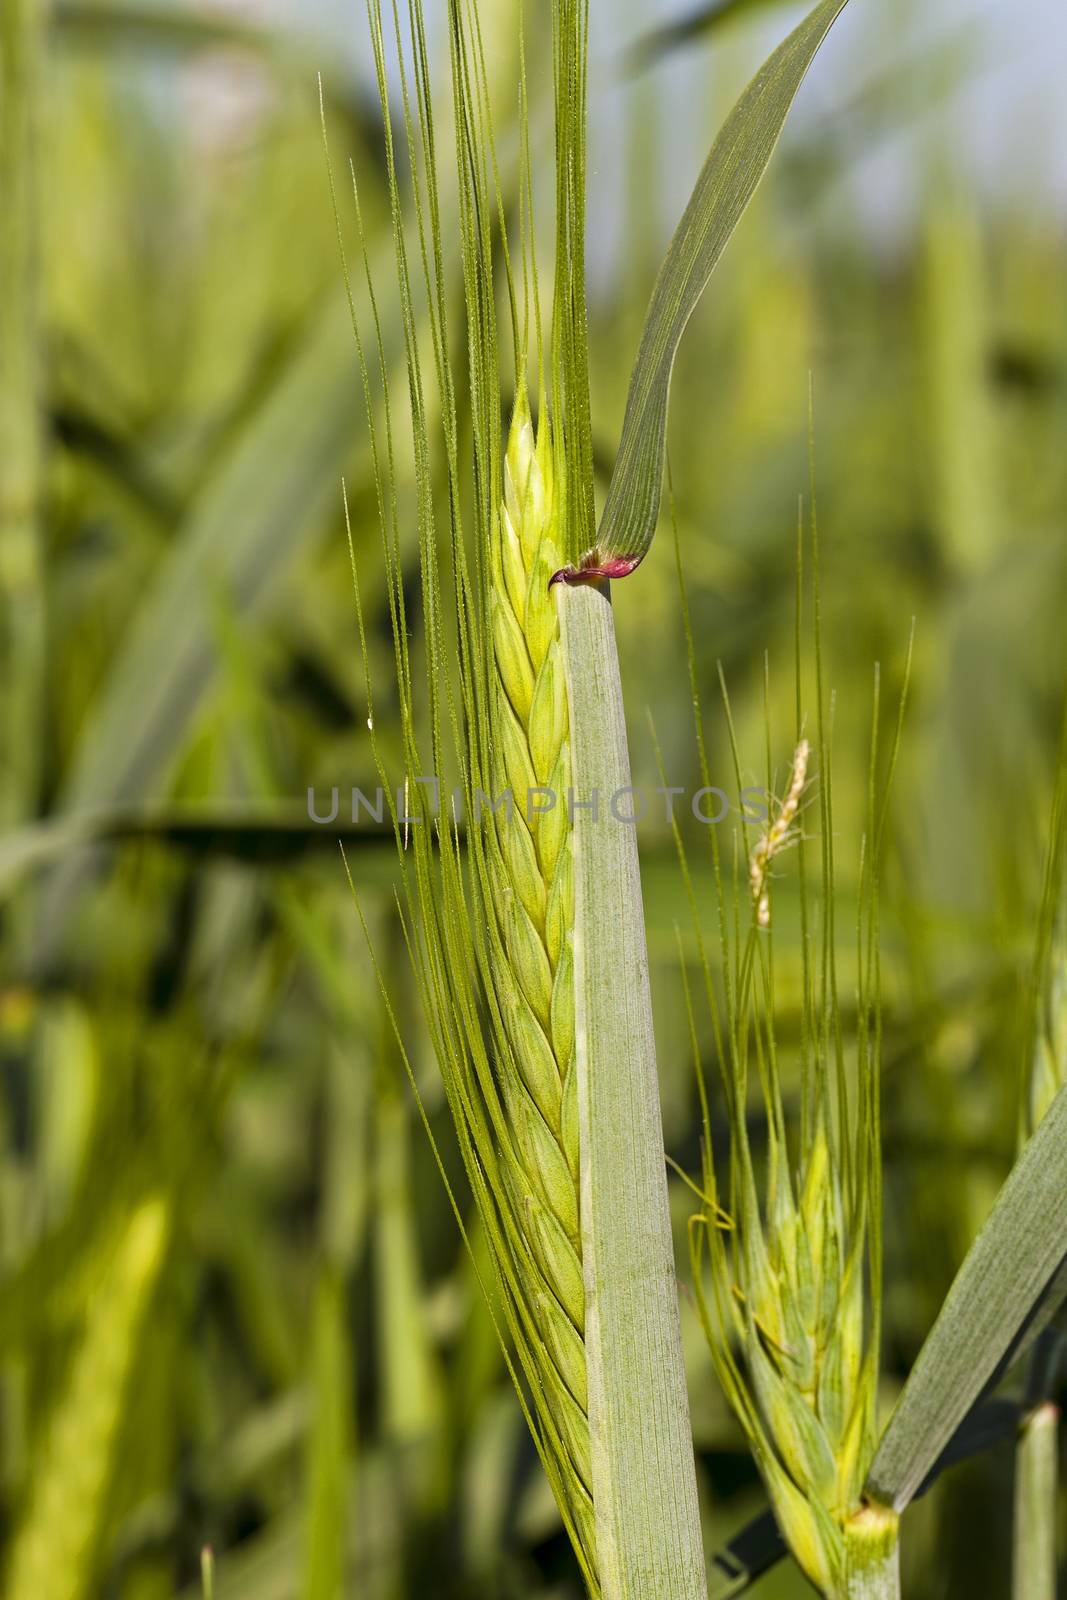   the ear of an unripe cereal photographed by a close up